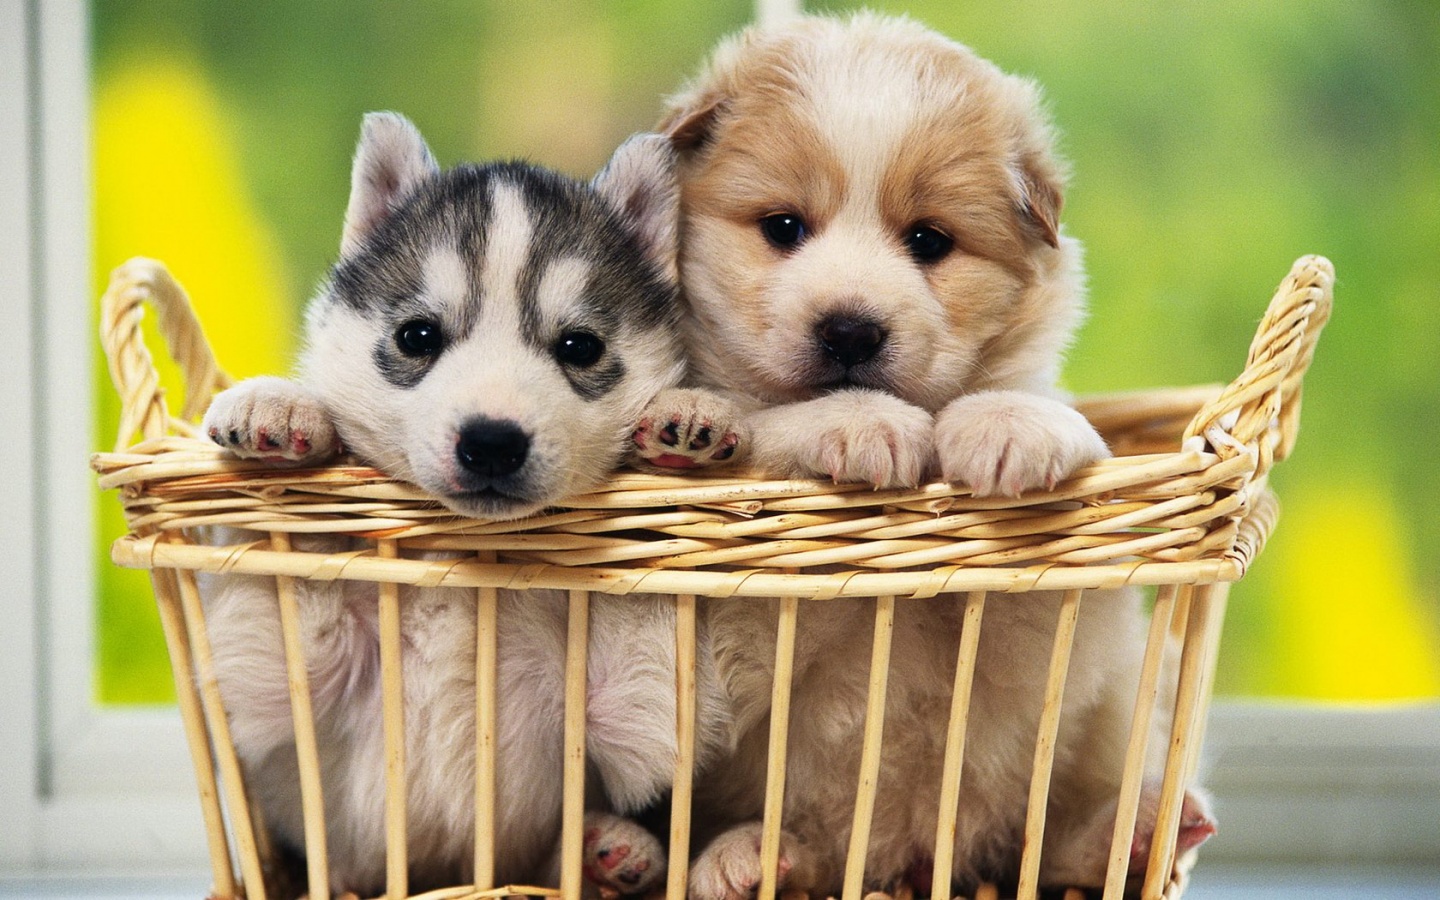 Free Dogs HD Wallpapers Cute Dogs Wallpapers HD Cute Dogs Wallpapers